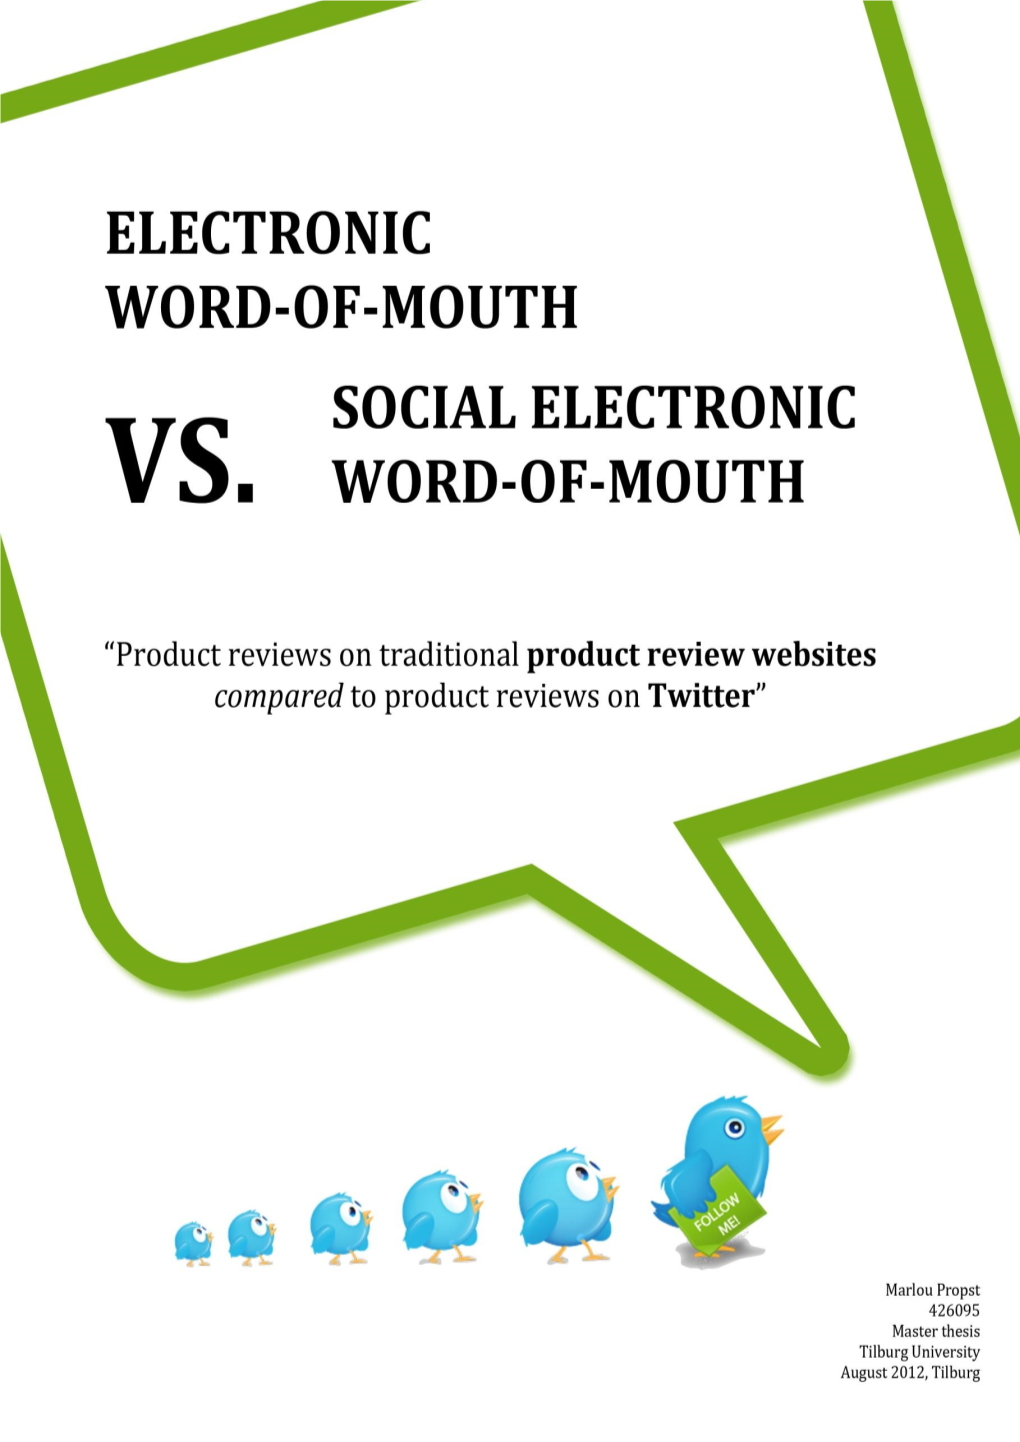 Electronic-Word-Of-Mouth Versus Social-Electronic Word-Of-Mouth